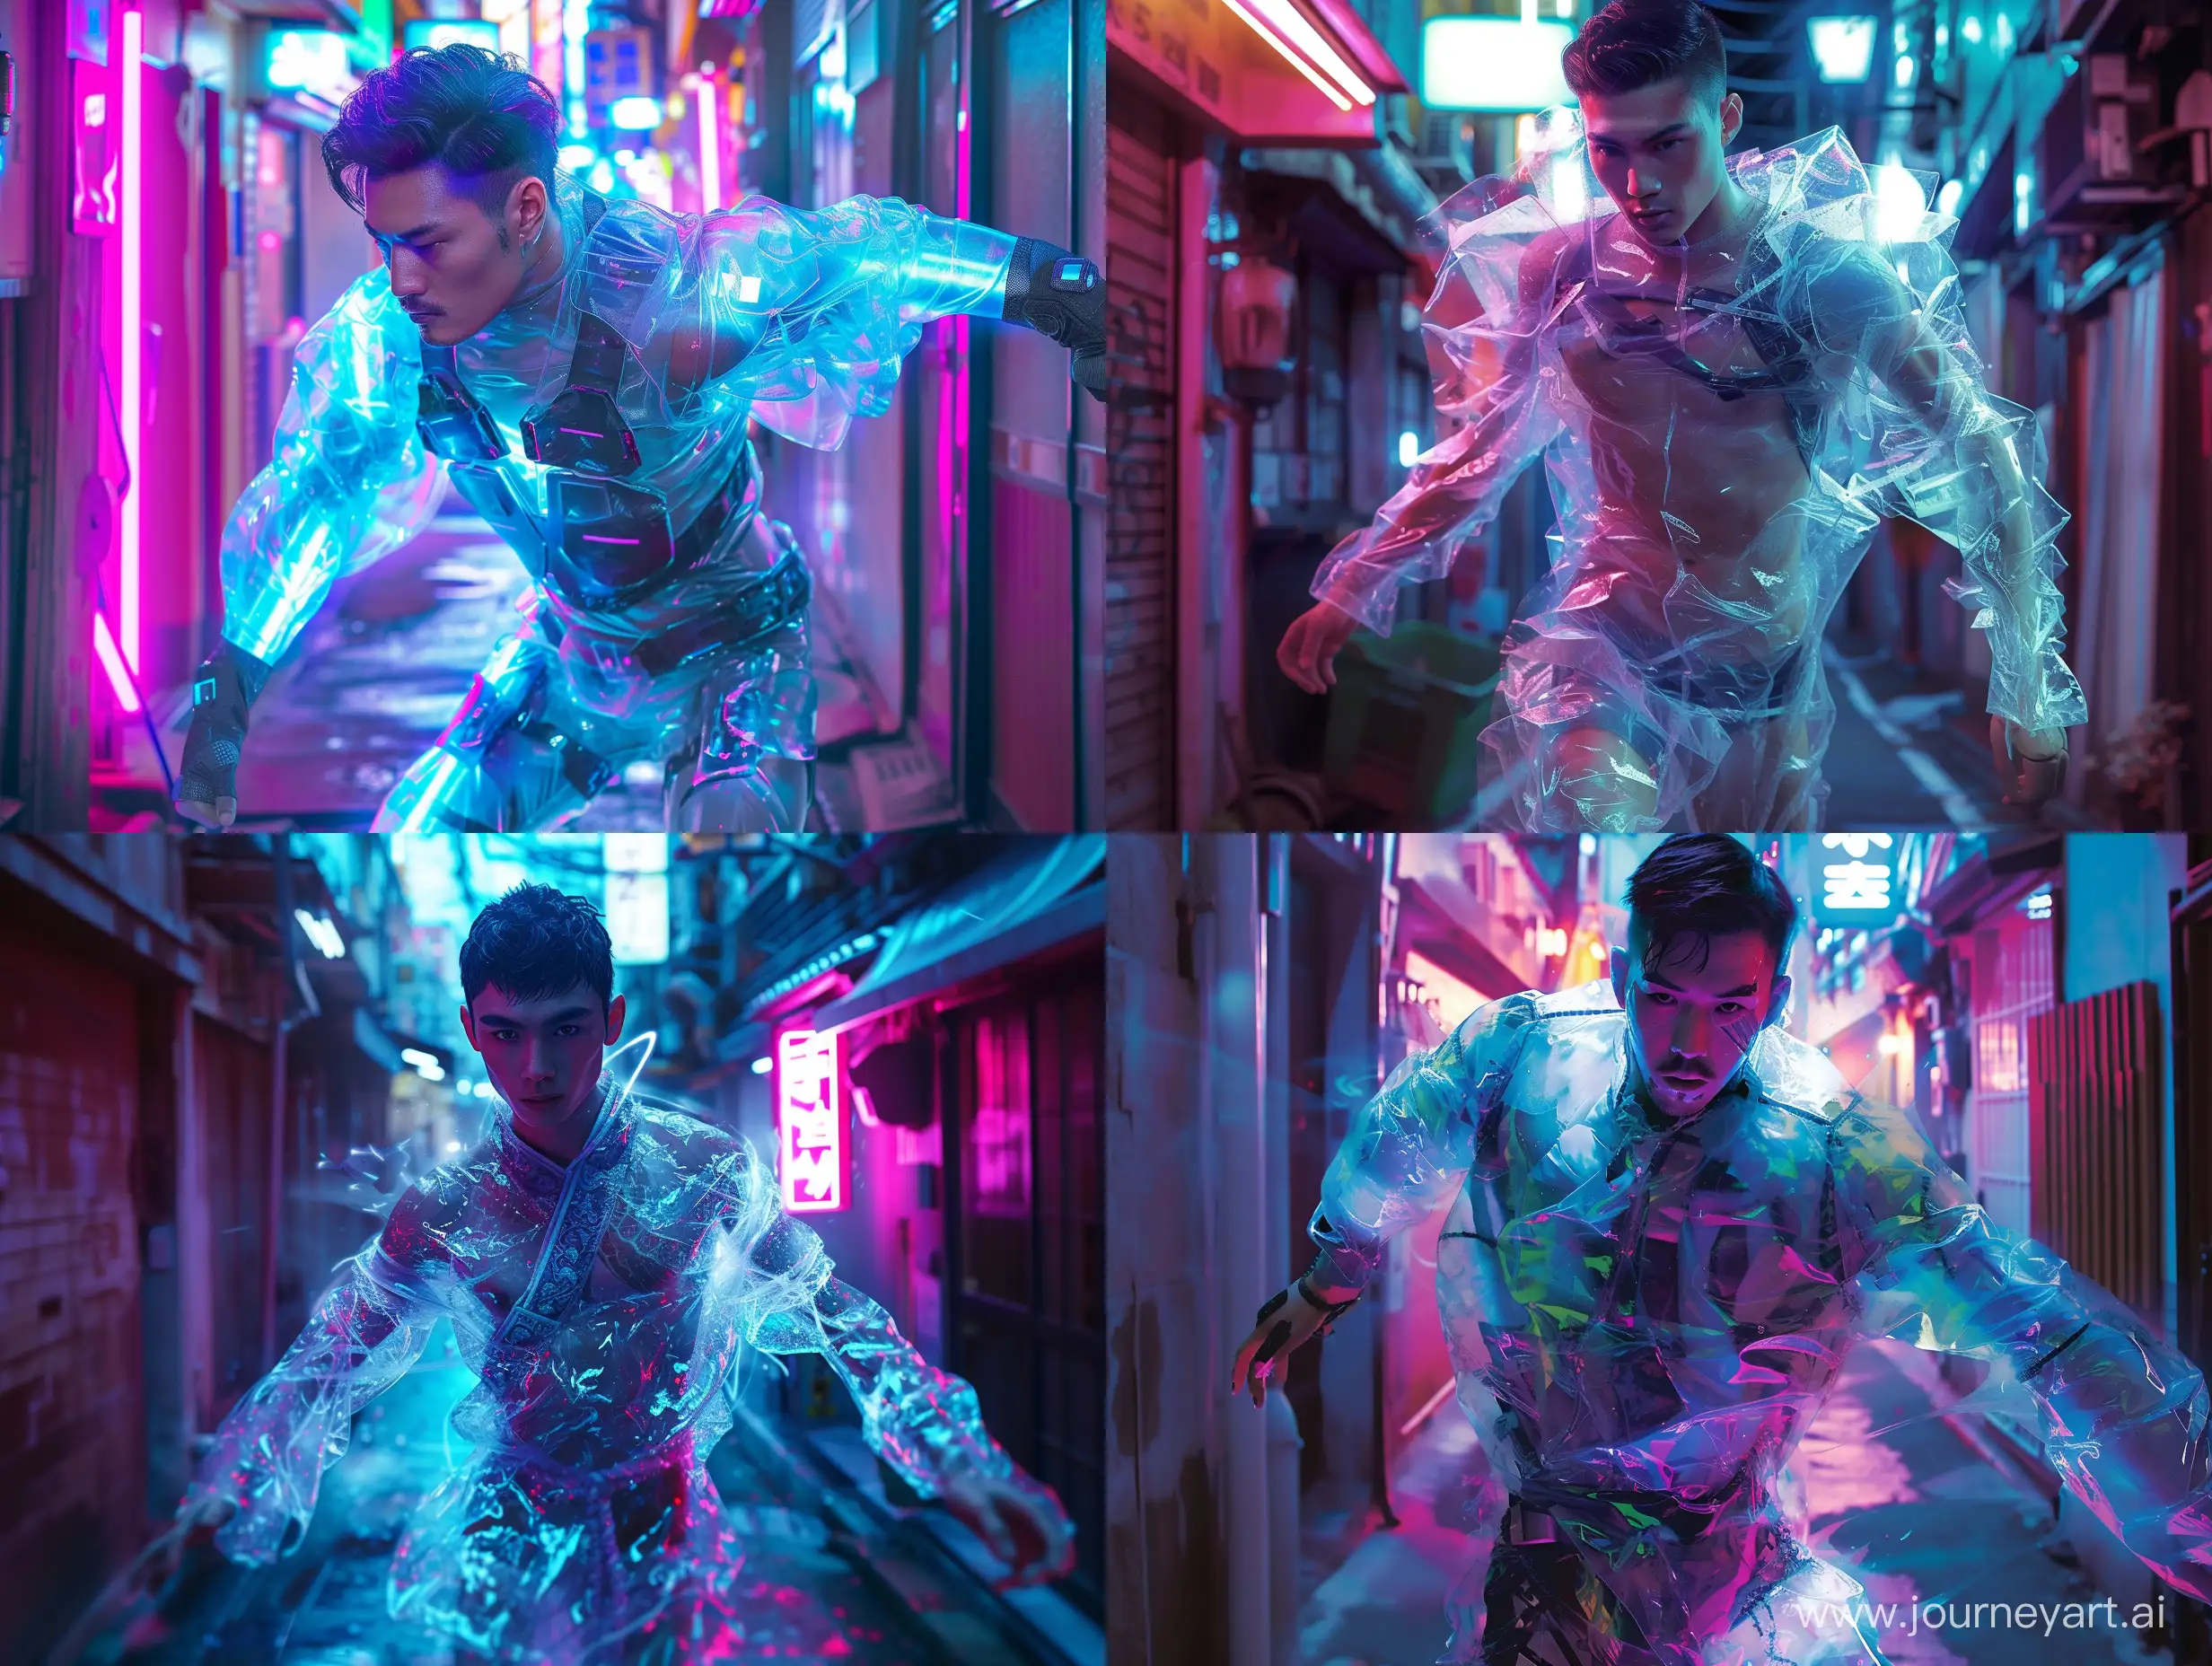 iPhone photo in a hyper realistic style of a man, wearing a translucent warrior outfit that is hyper modern. He is in an neon lit alleyway in a futuristic Tokyo.